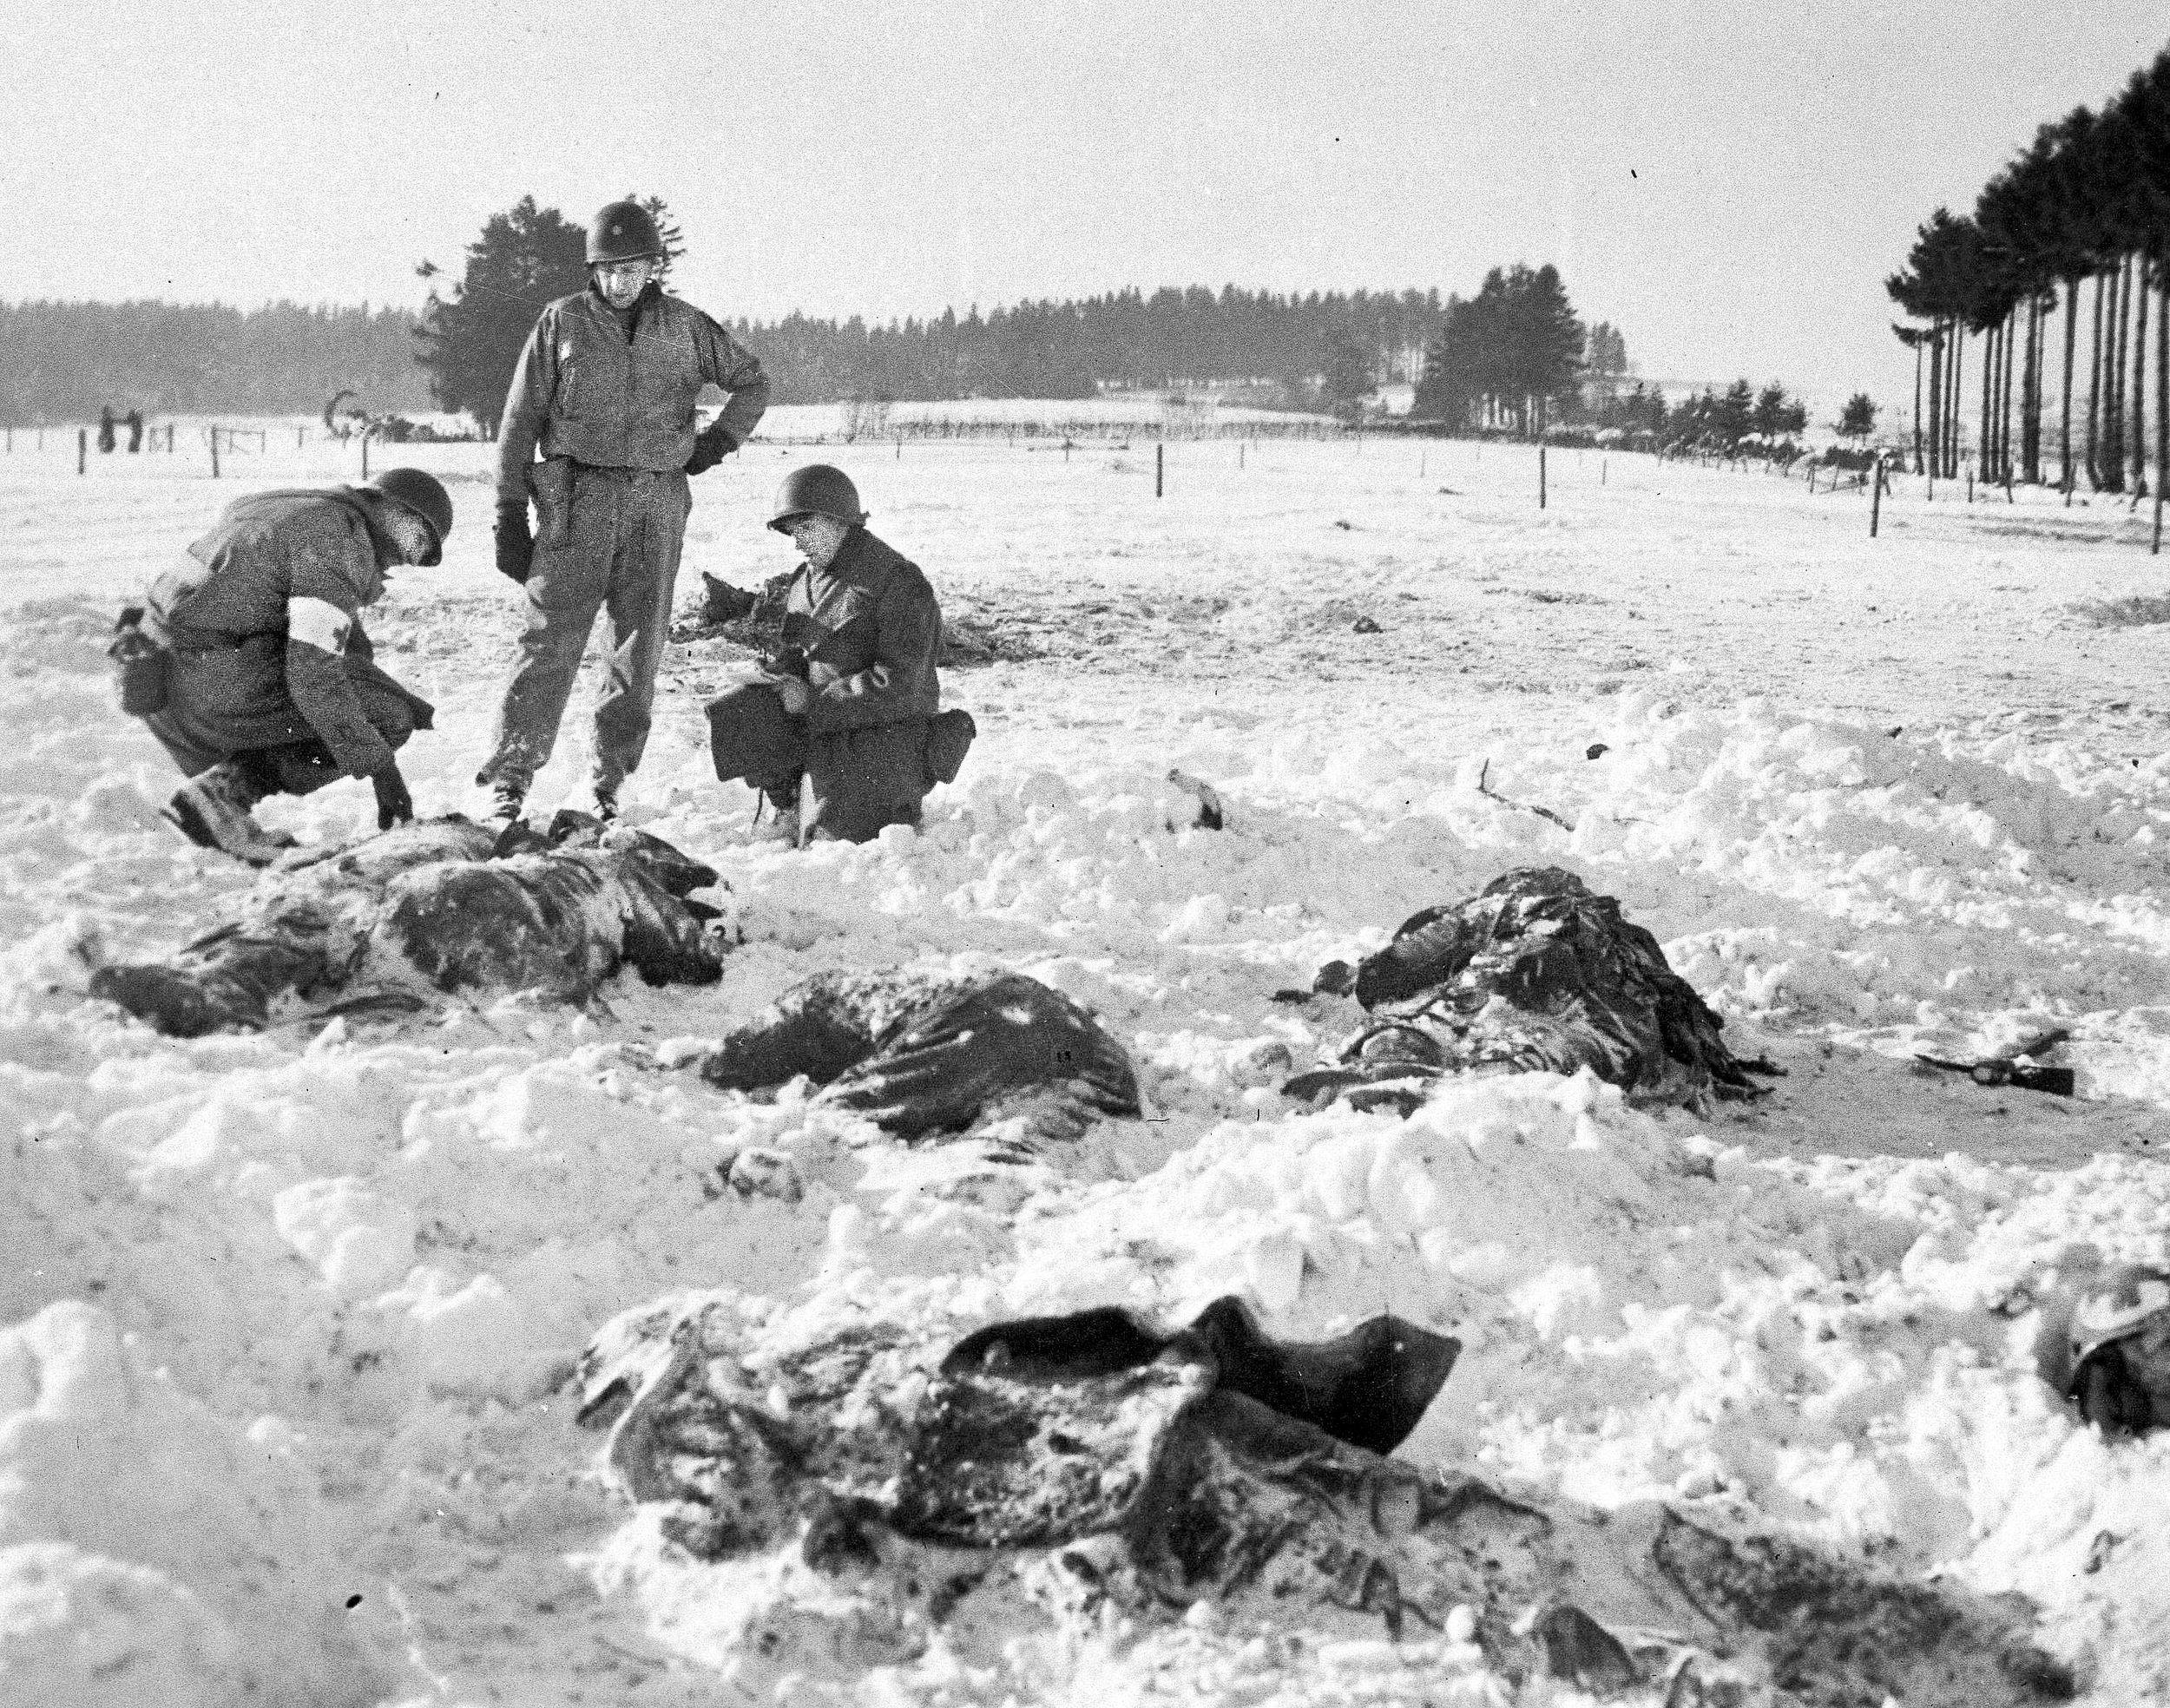 Medical personnel examine the corpses of the slain Americans, many of whom were shot at close range. The exact number killed has never been determined, but the “official” count was at least 86.